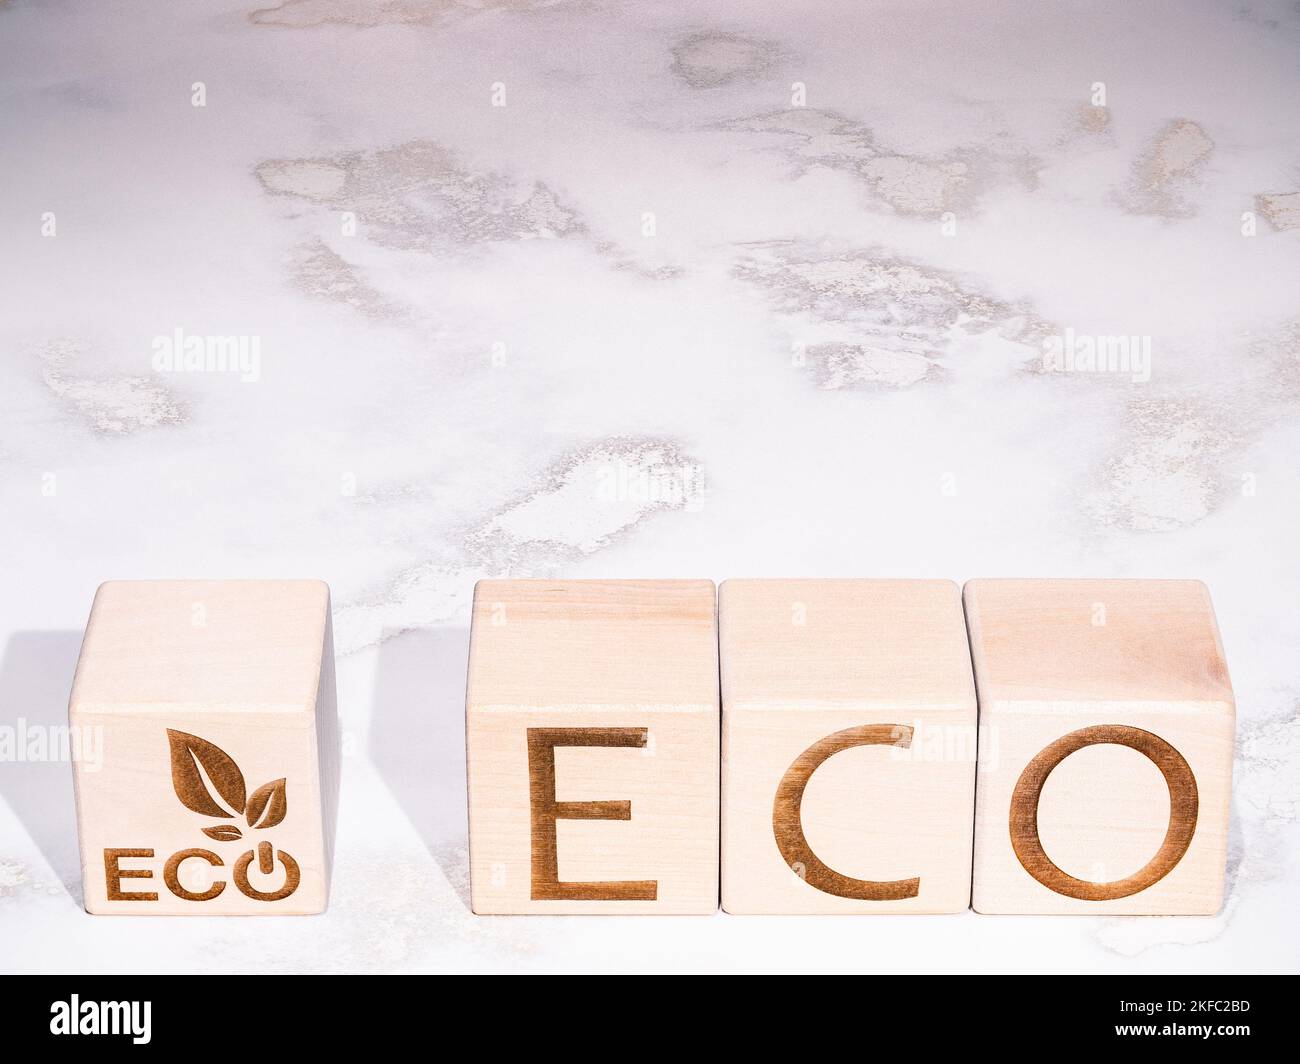 ECO text on wooden cubes as an environmentally friendly business concept Stock Photo